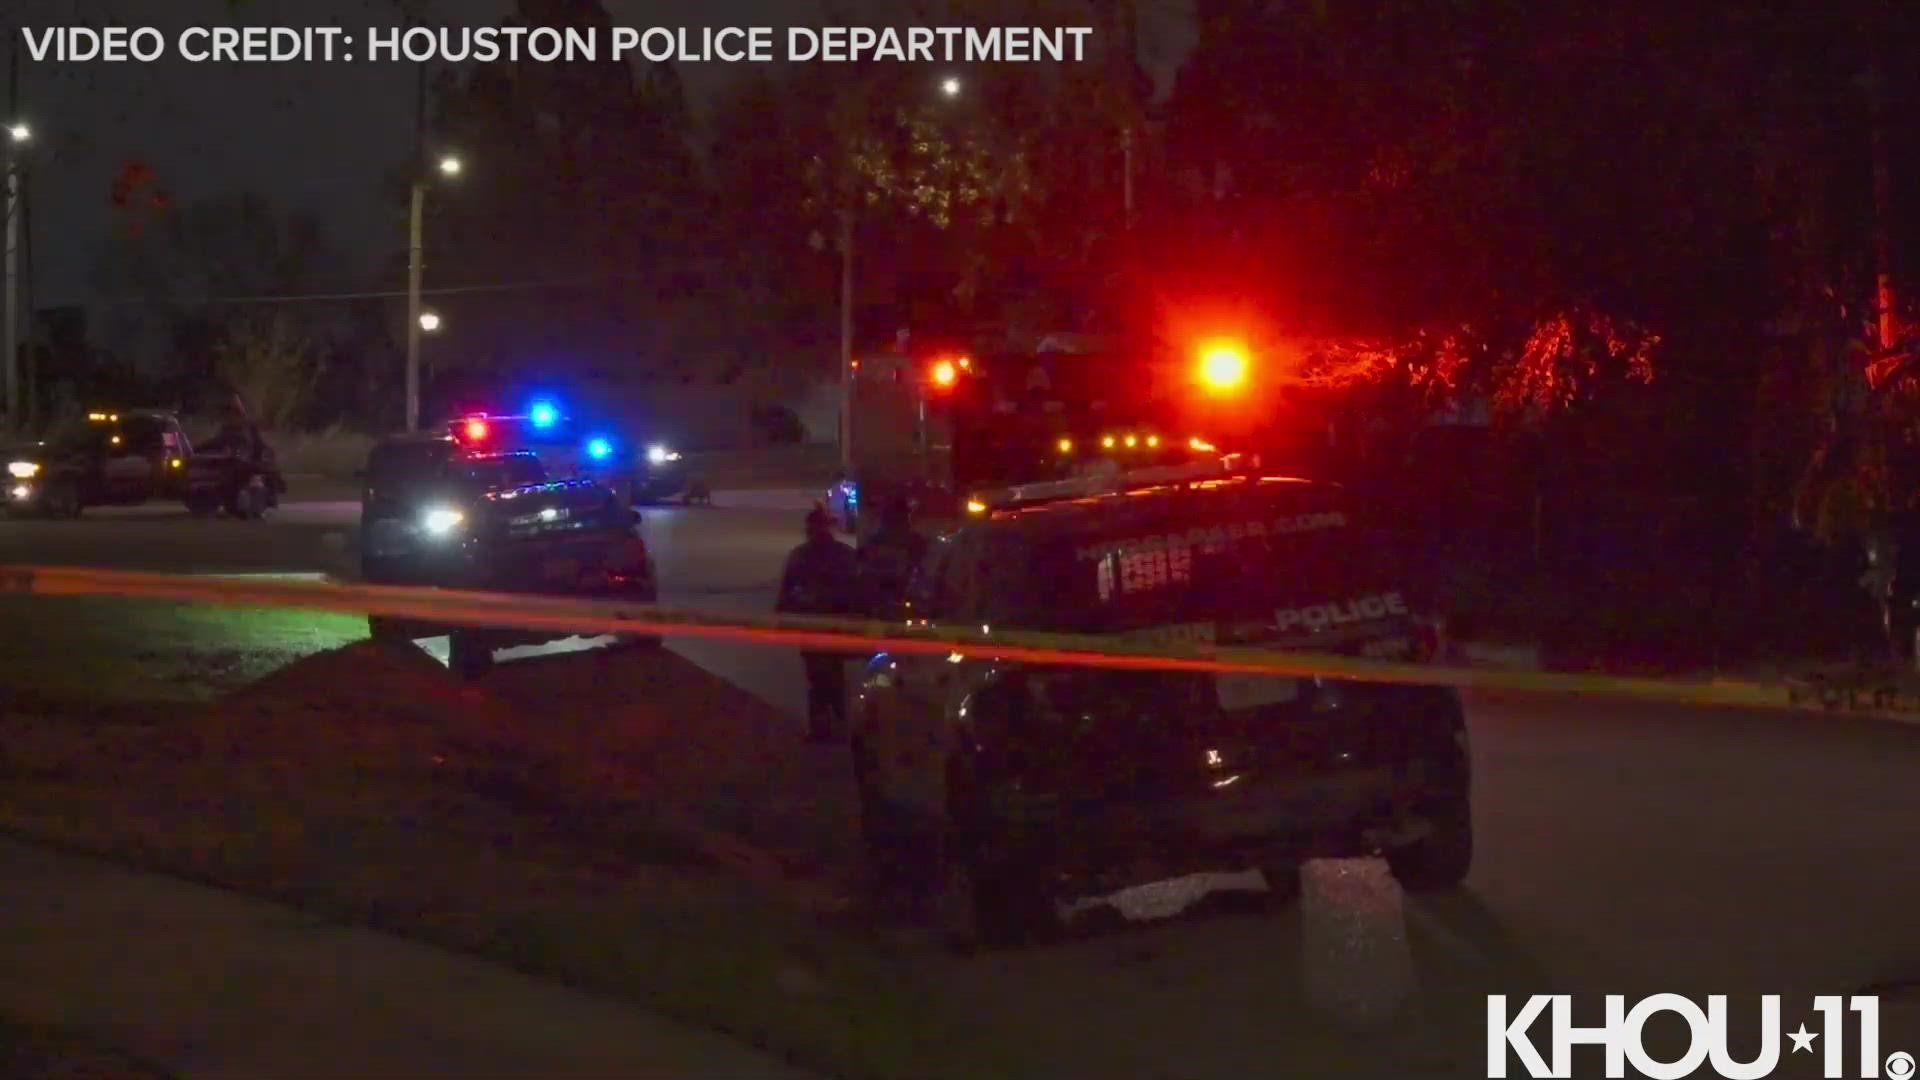 Houston police are investigating after two people were shot in a suspected home invasion in the Greater East End area.